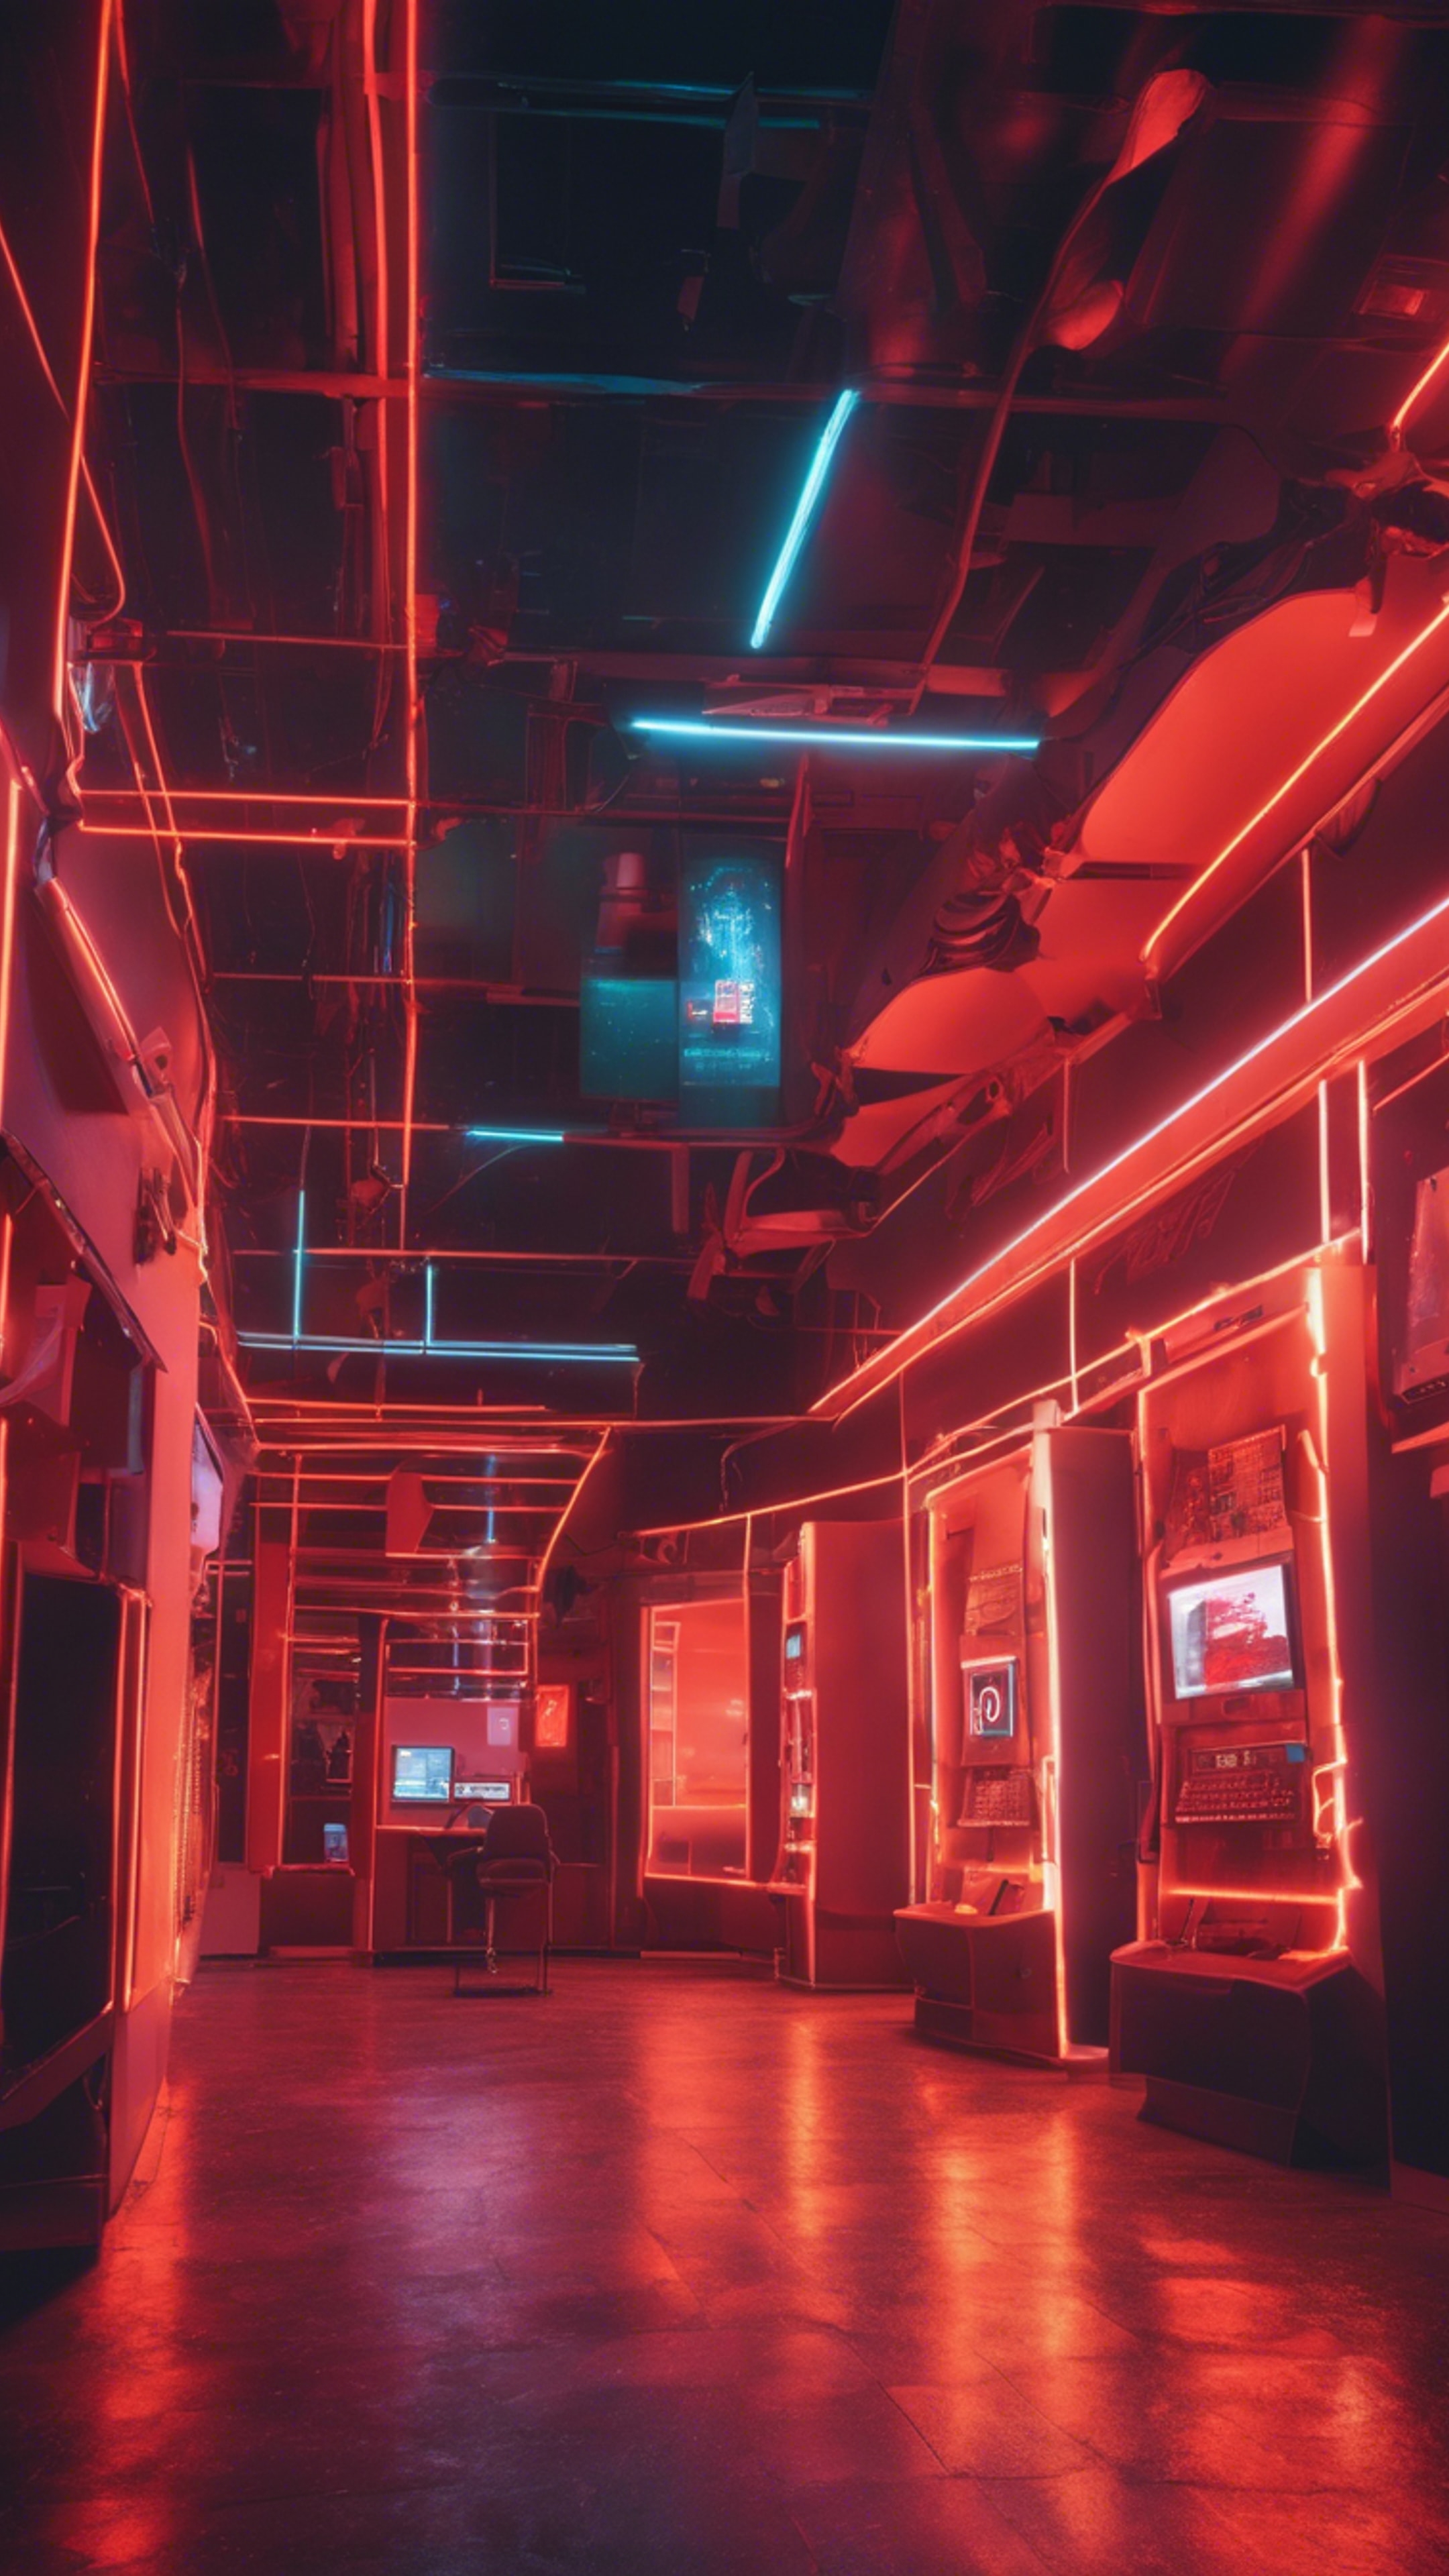 An architecturally unique cyber cafe glowing with neon red and orange lights at night. Tapeta[37c23e18da0f466d9ff8]